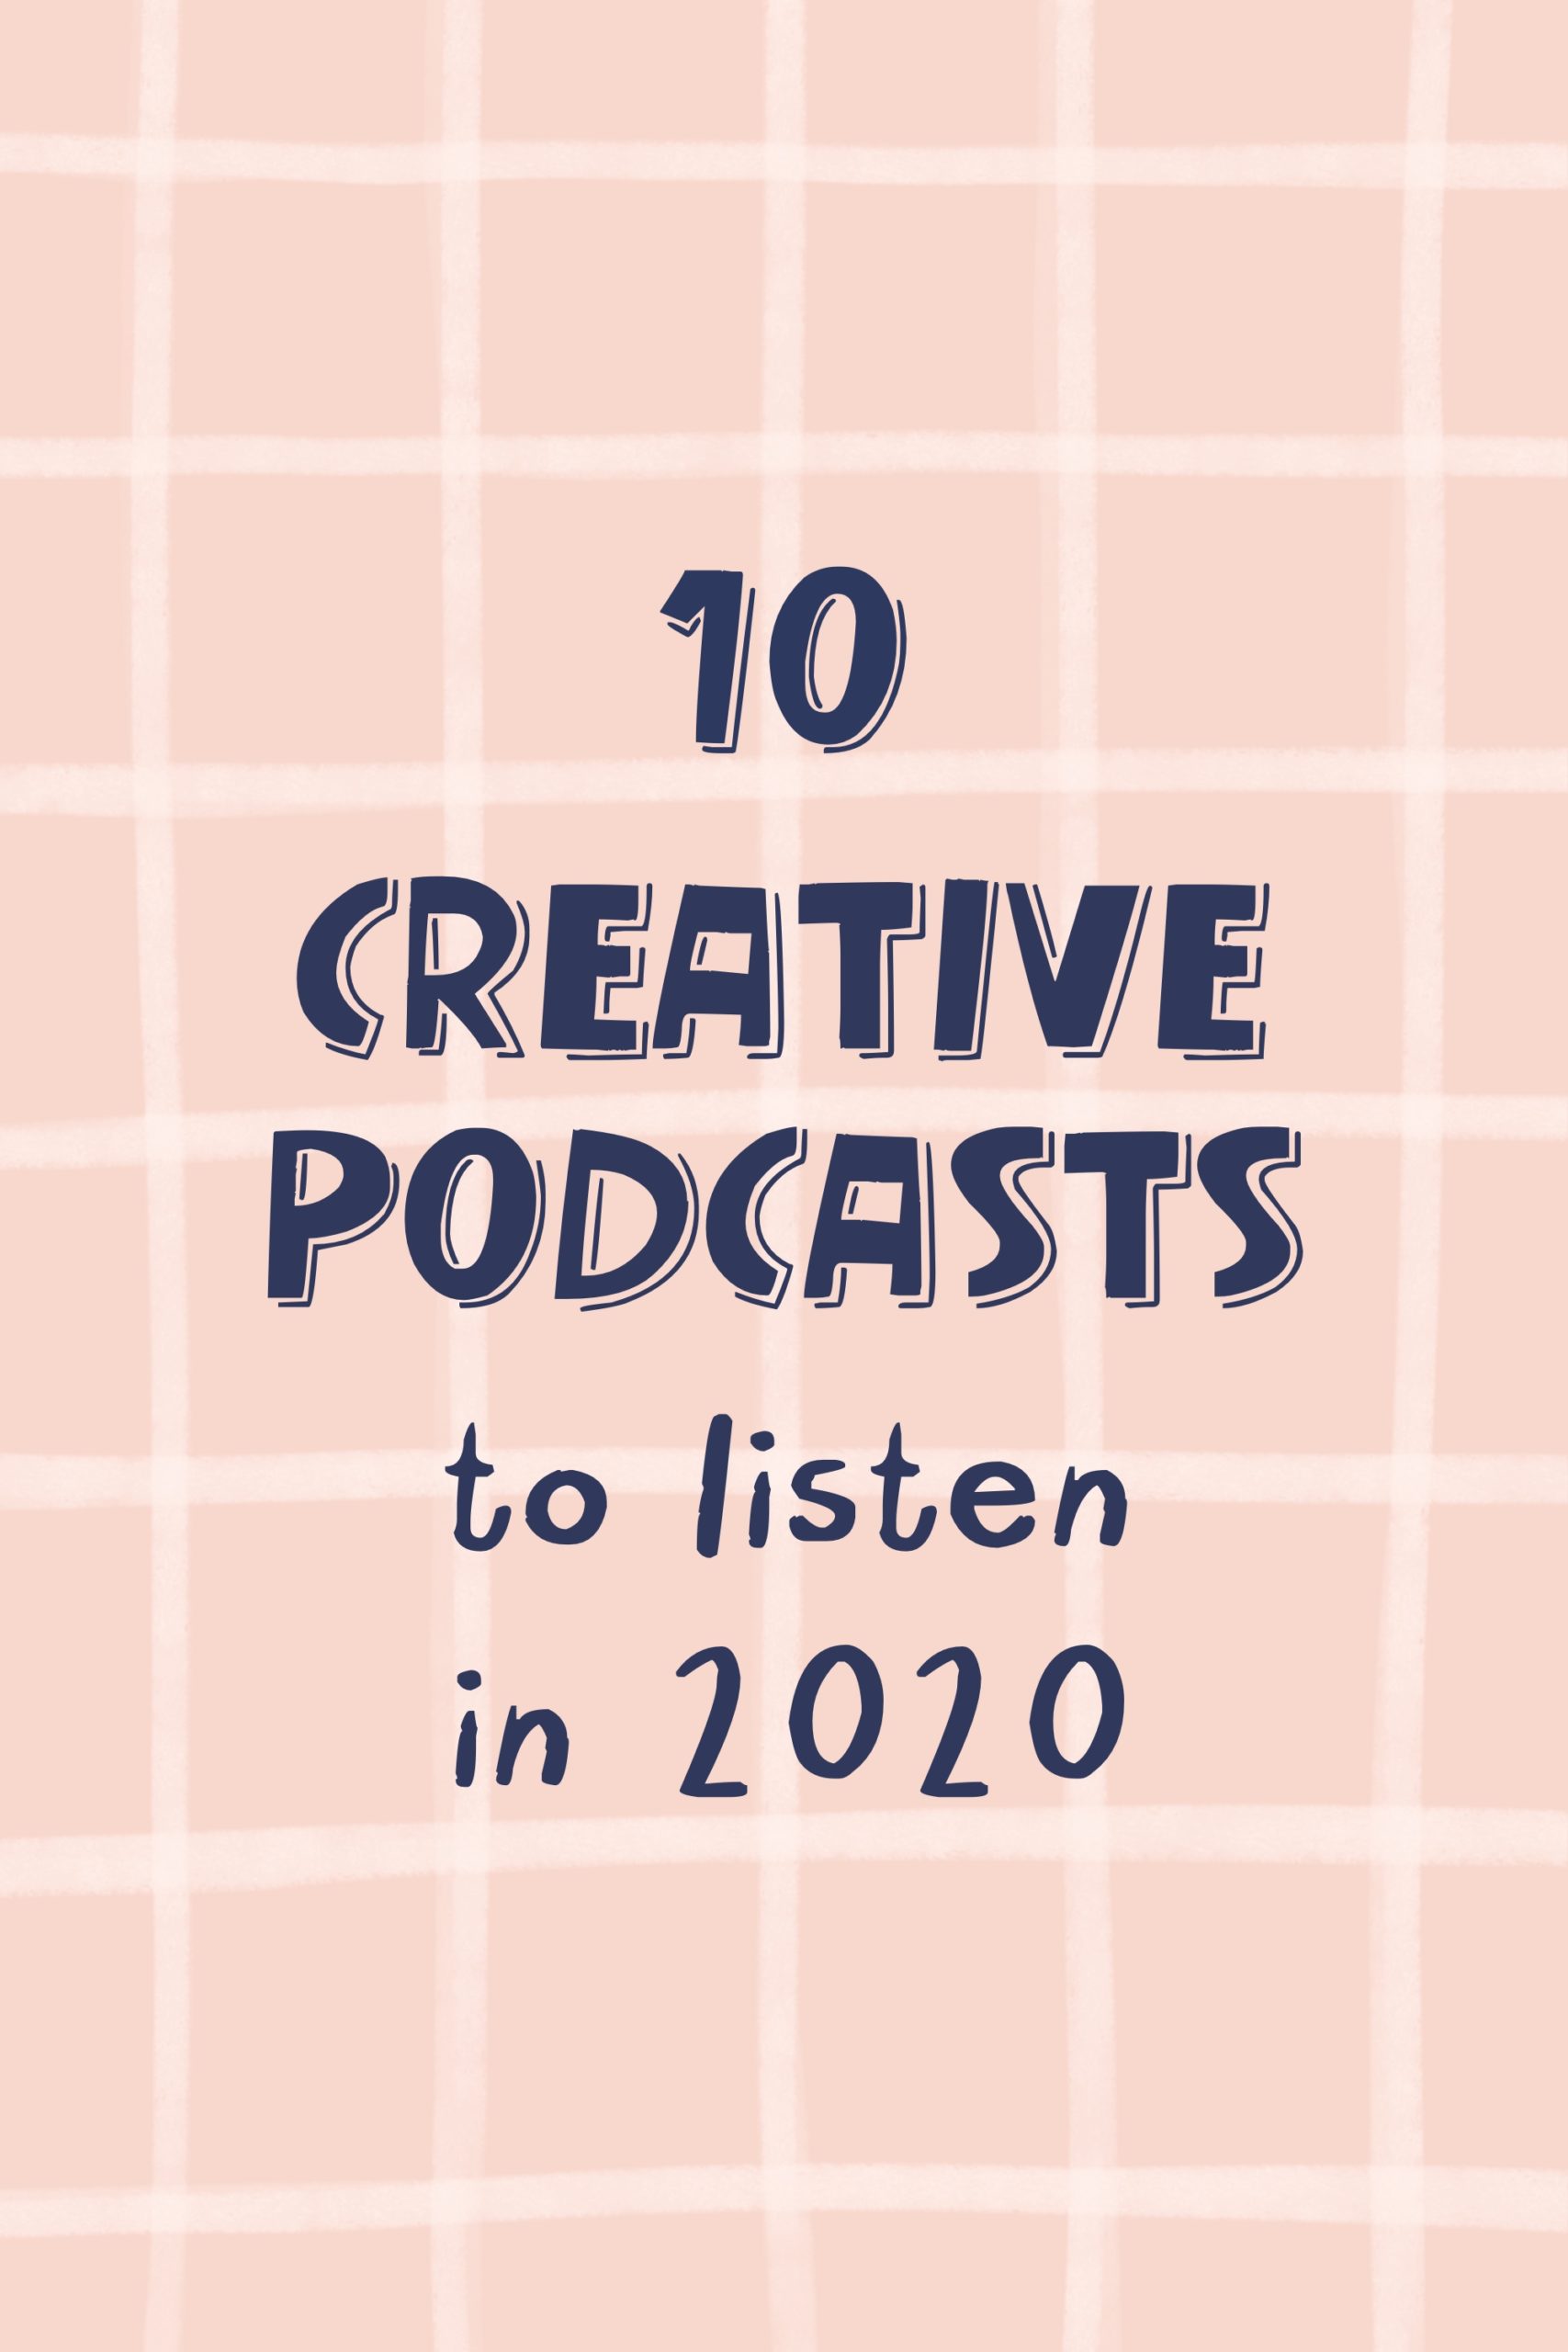 Creative podcasts to listen in 2020